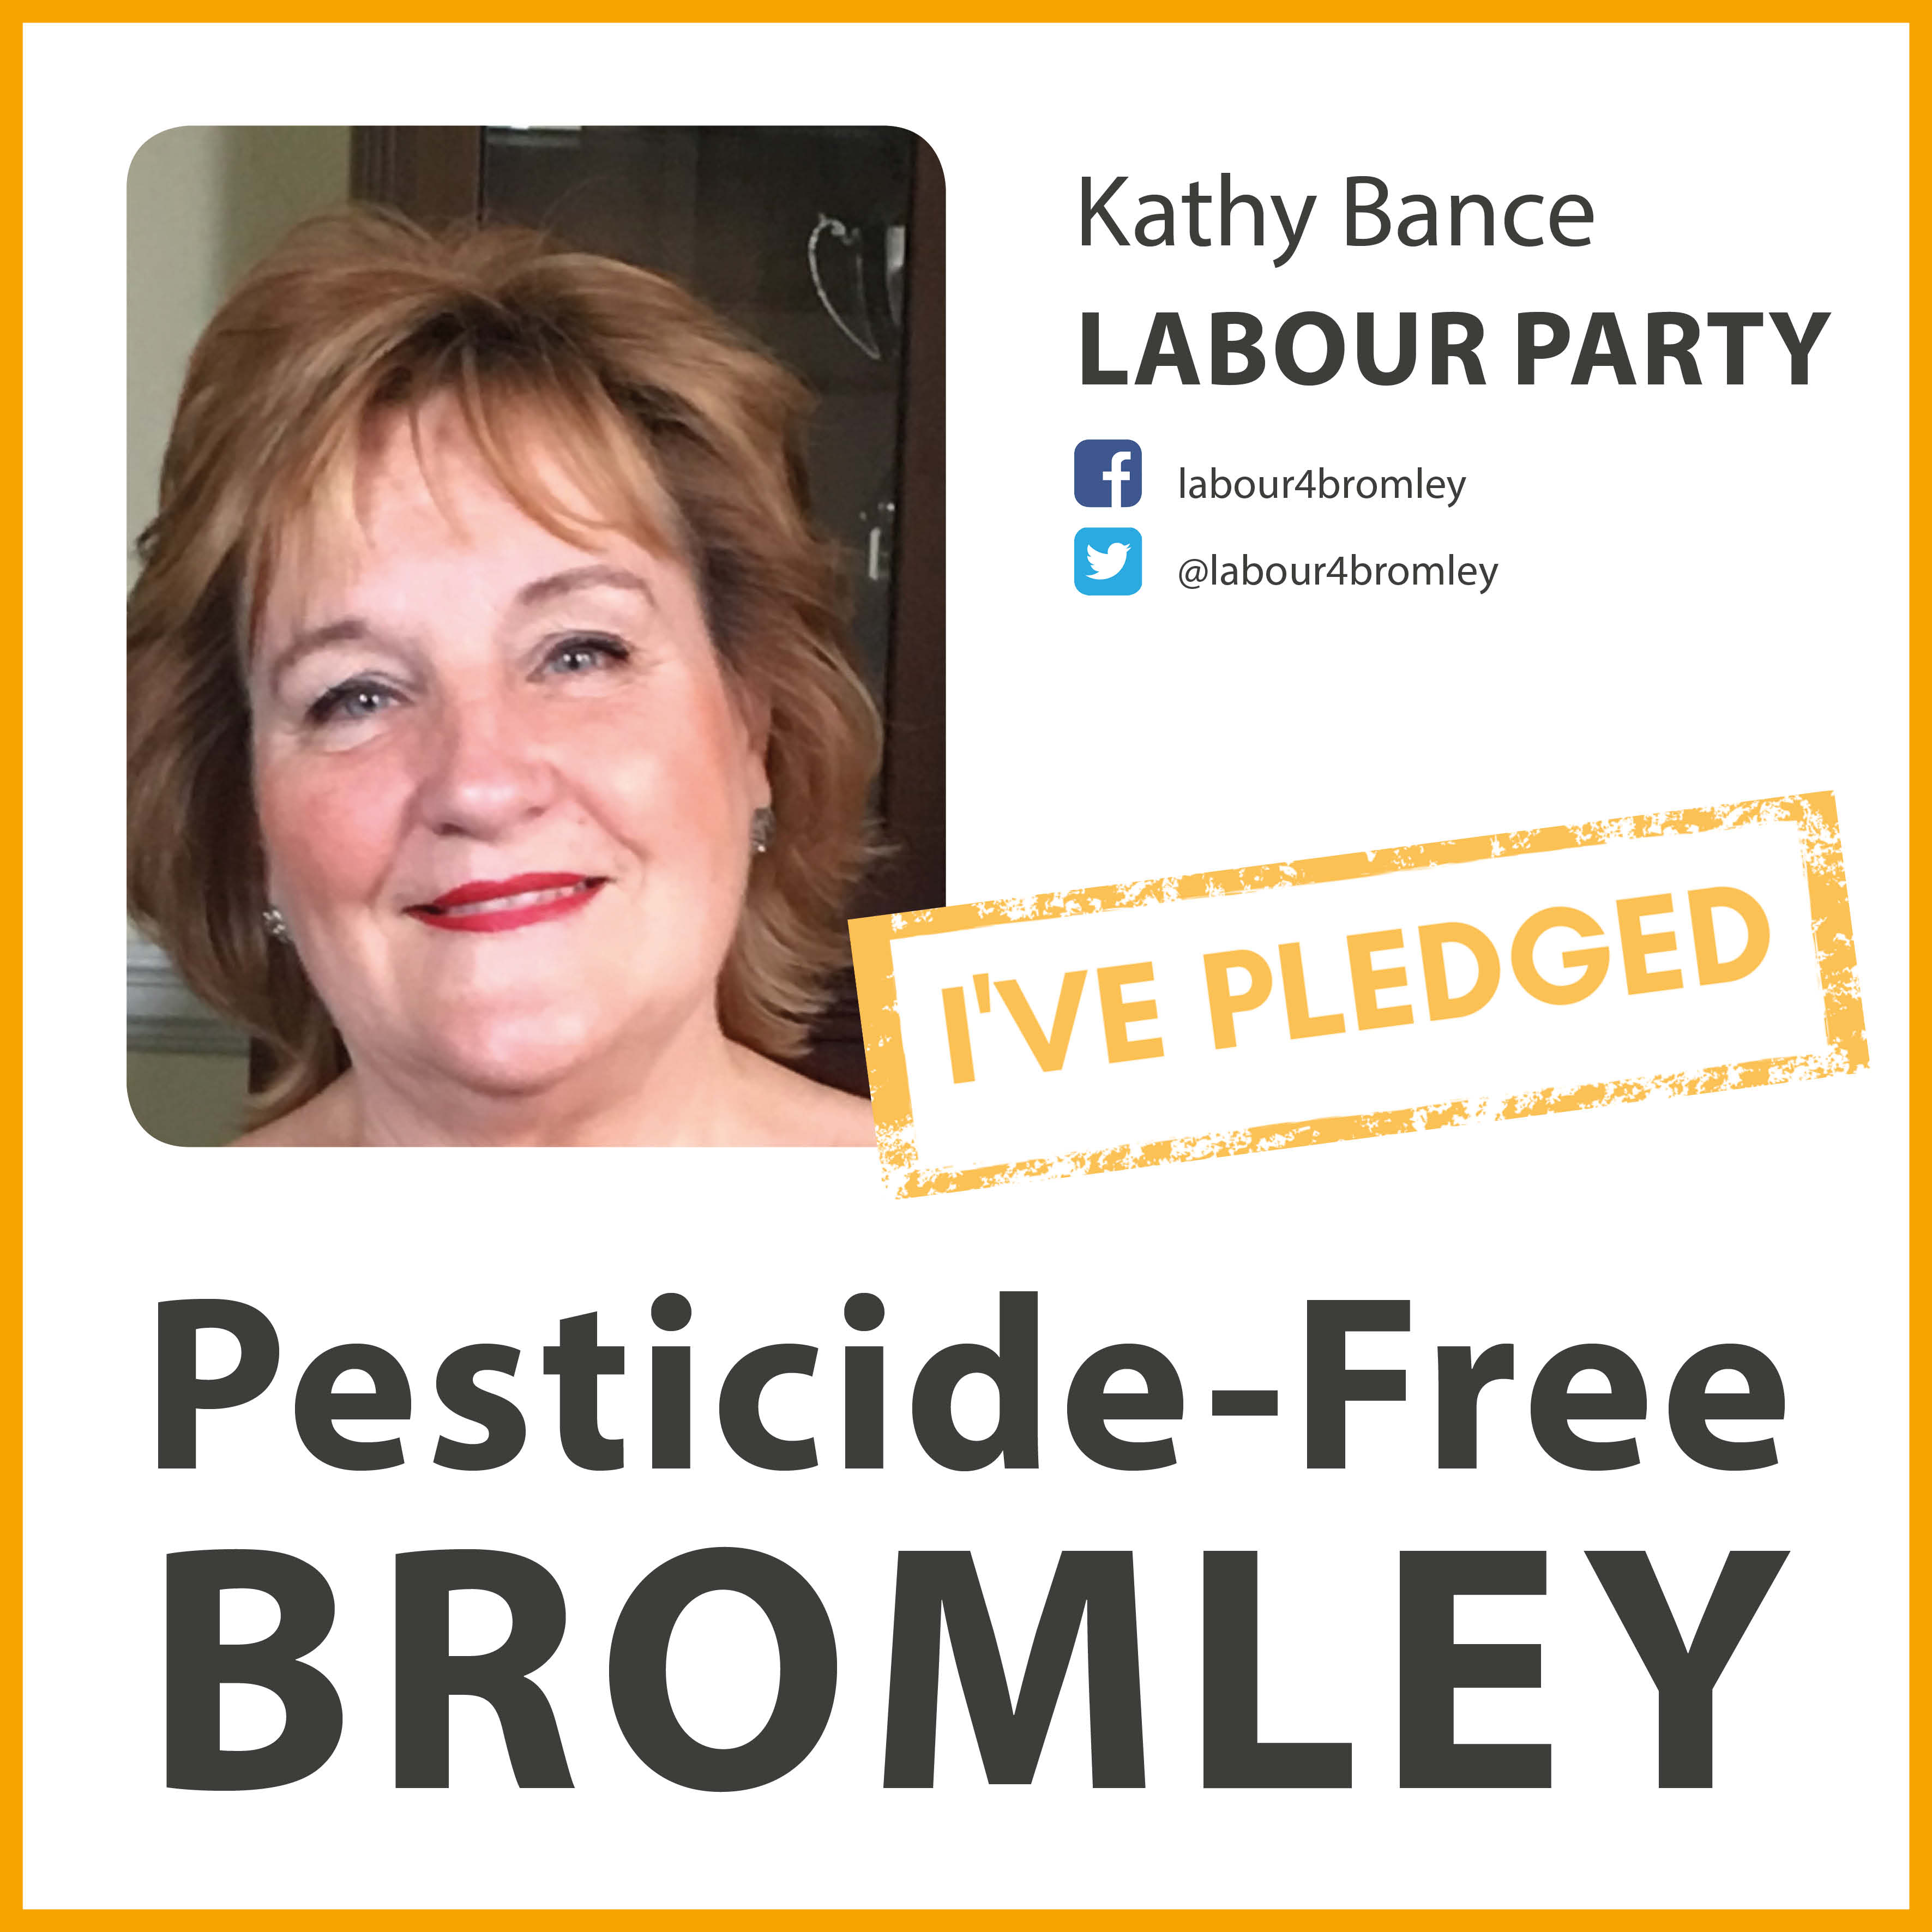 Kathy Bance has taken the pesticide-free pledge in Bromley